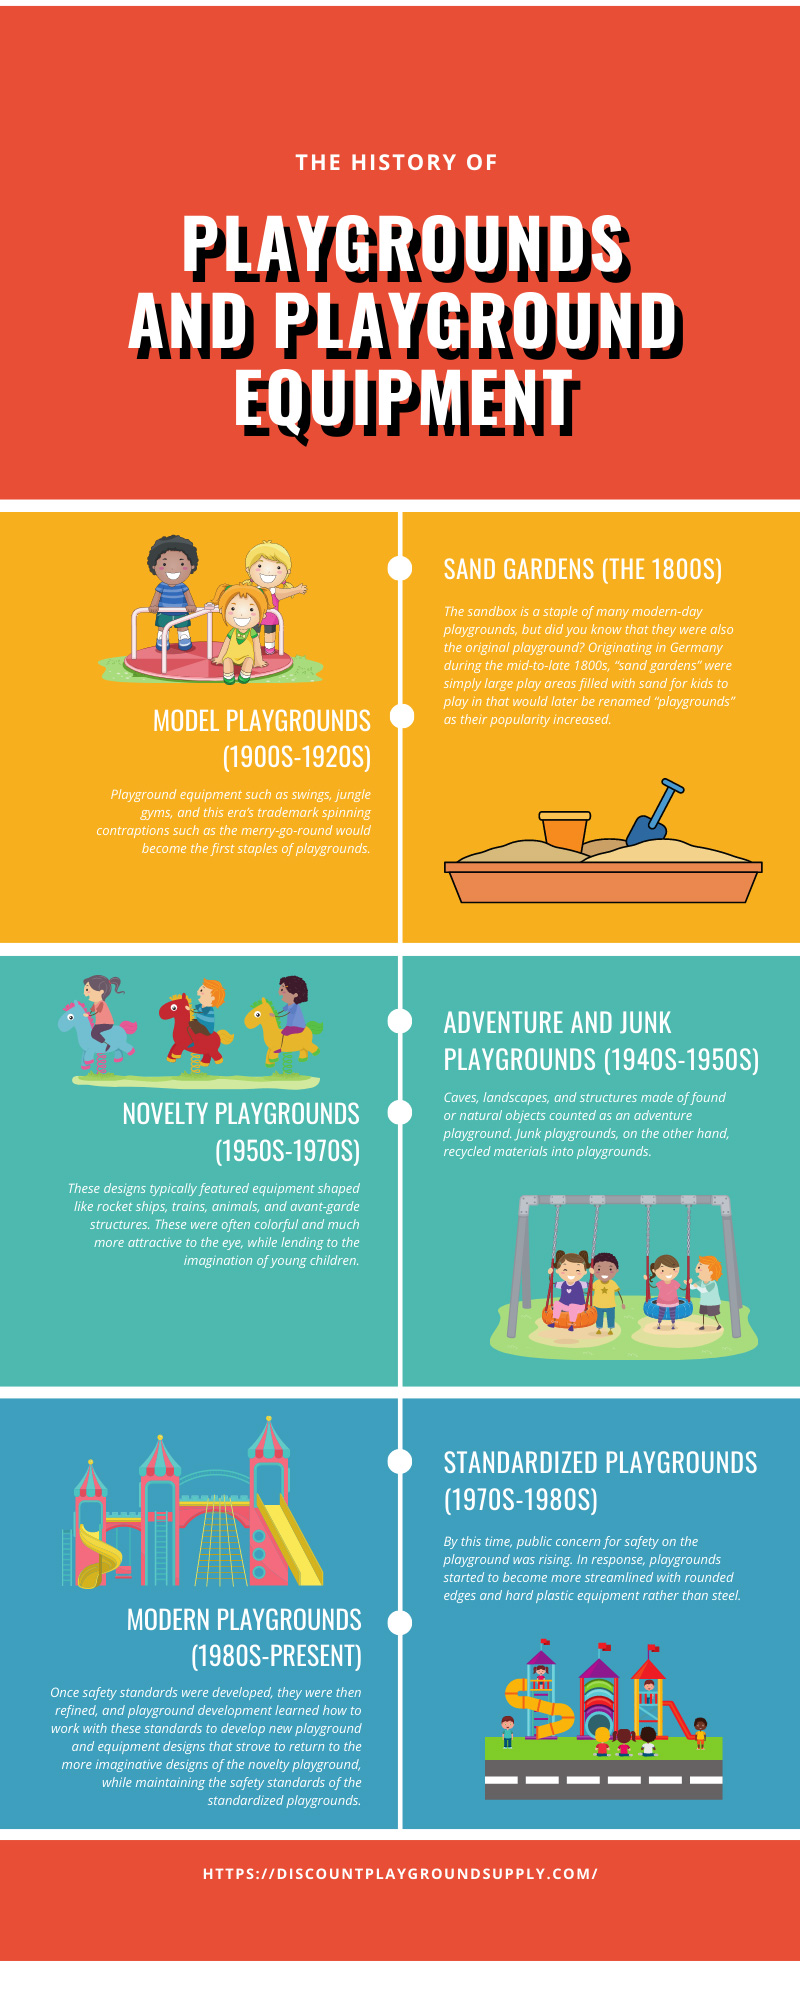 The History of Playgrounds and Playground Equipment